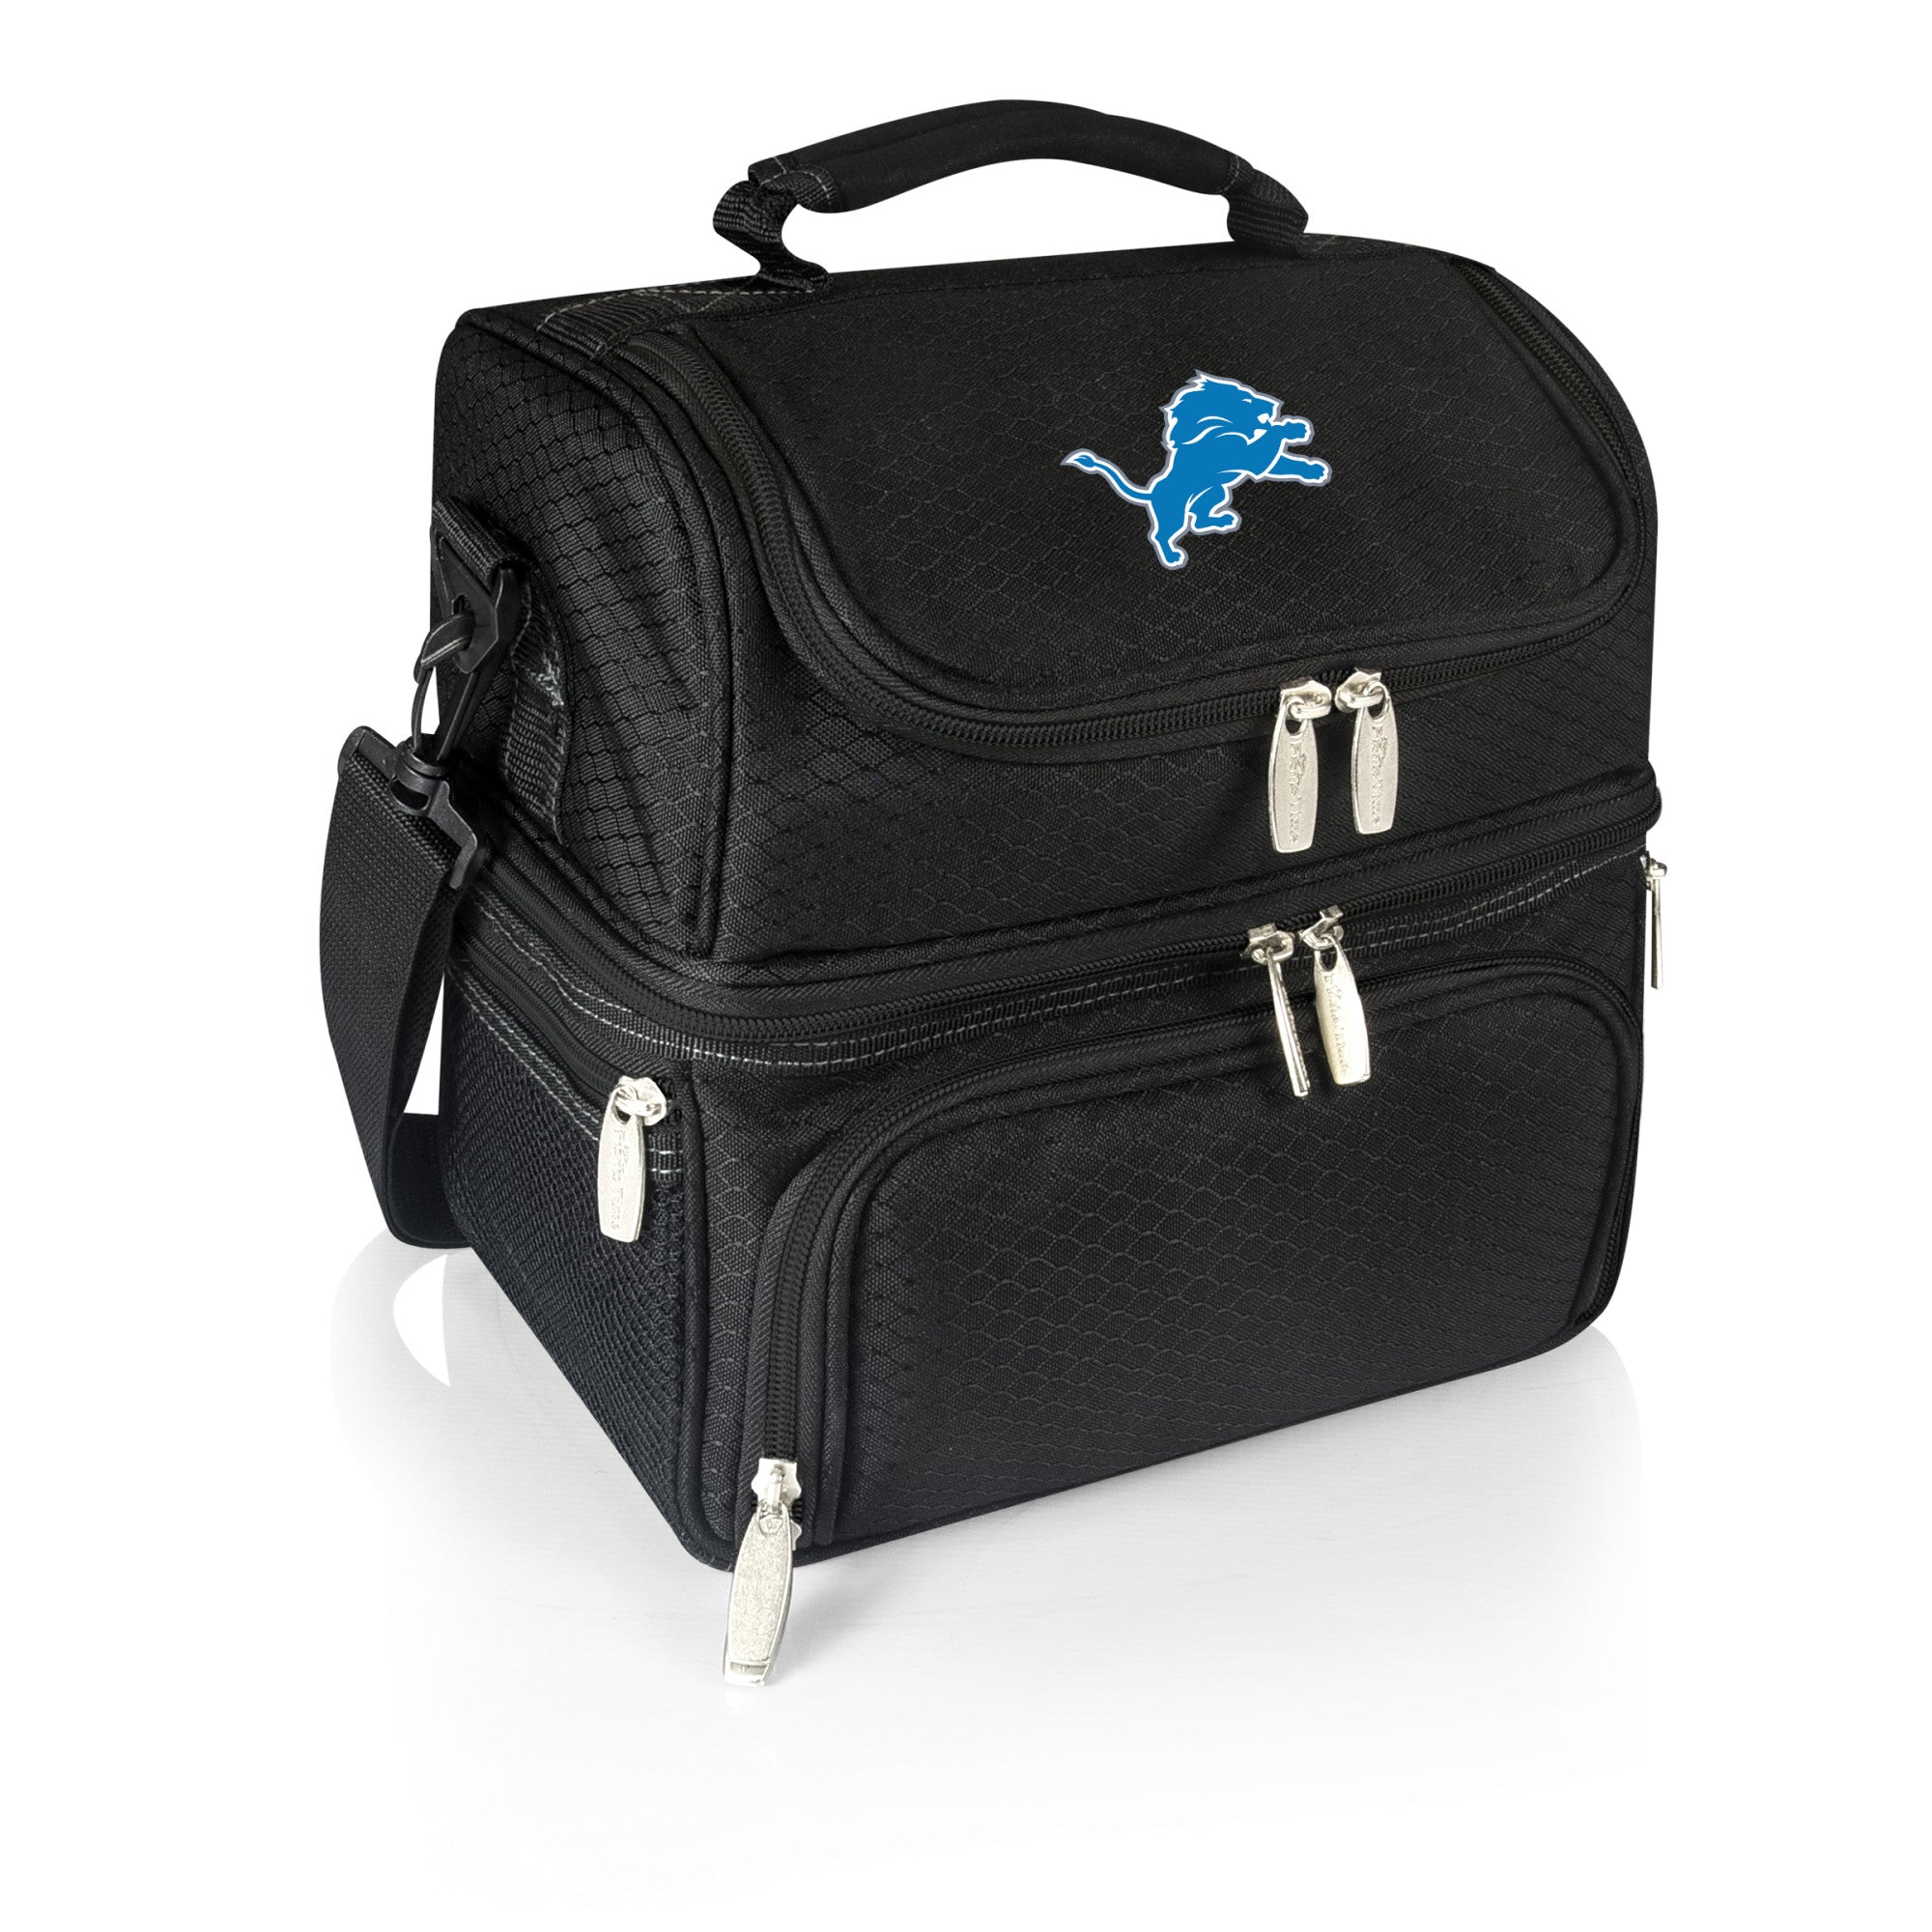 Detroit Lions - Pranzo Lunch Bag Cooler with Utensils